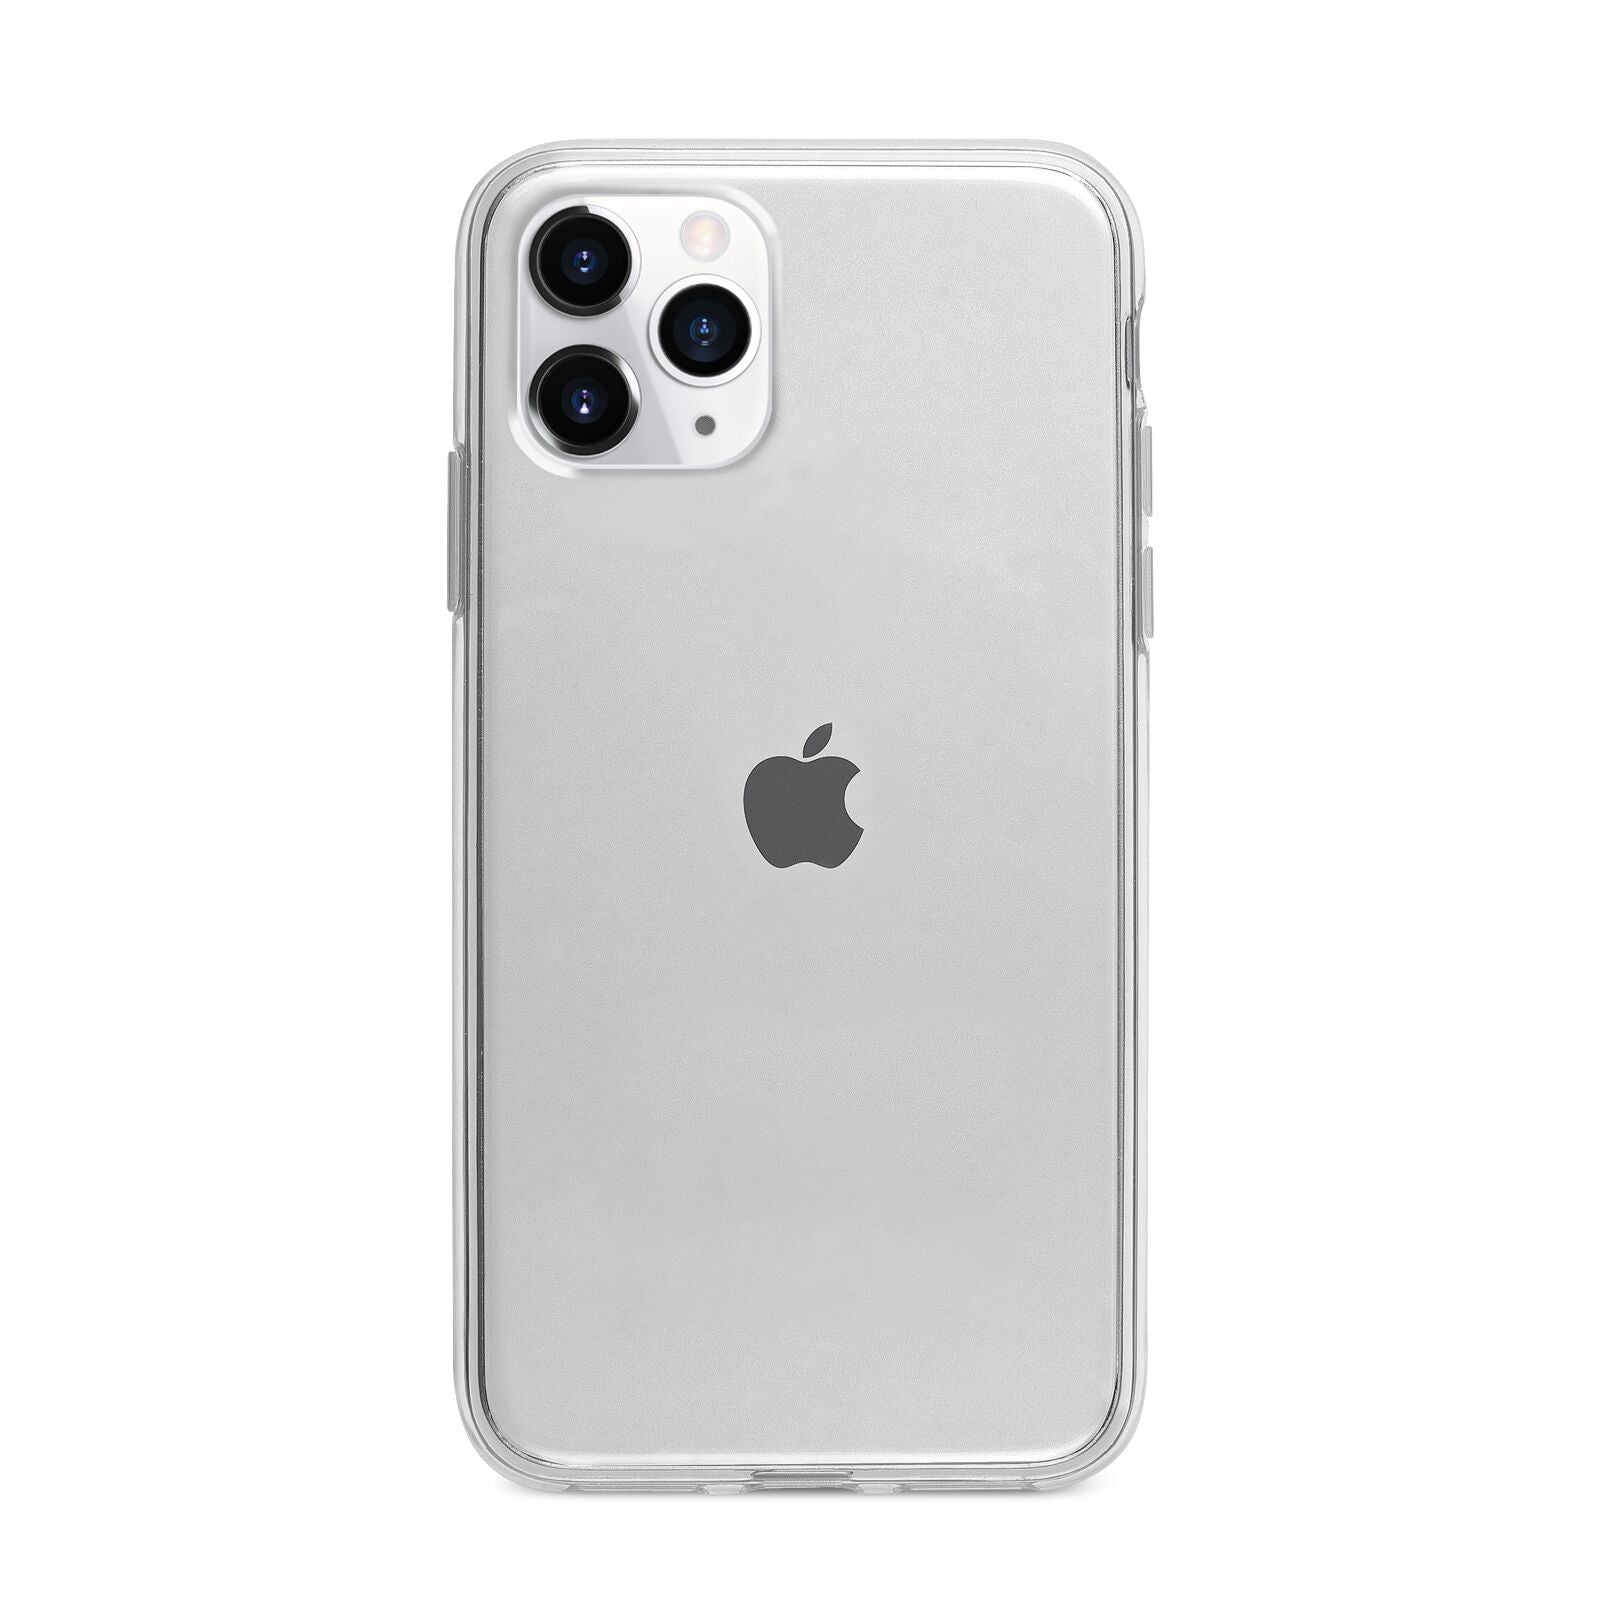 Clear Apple iPhone 11 Pro Max in Silver with Bumper Case